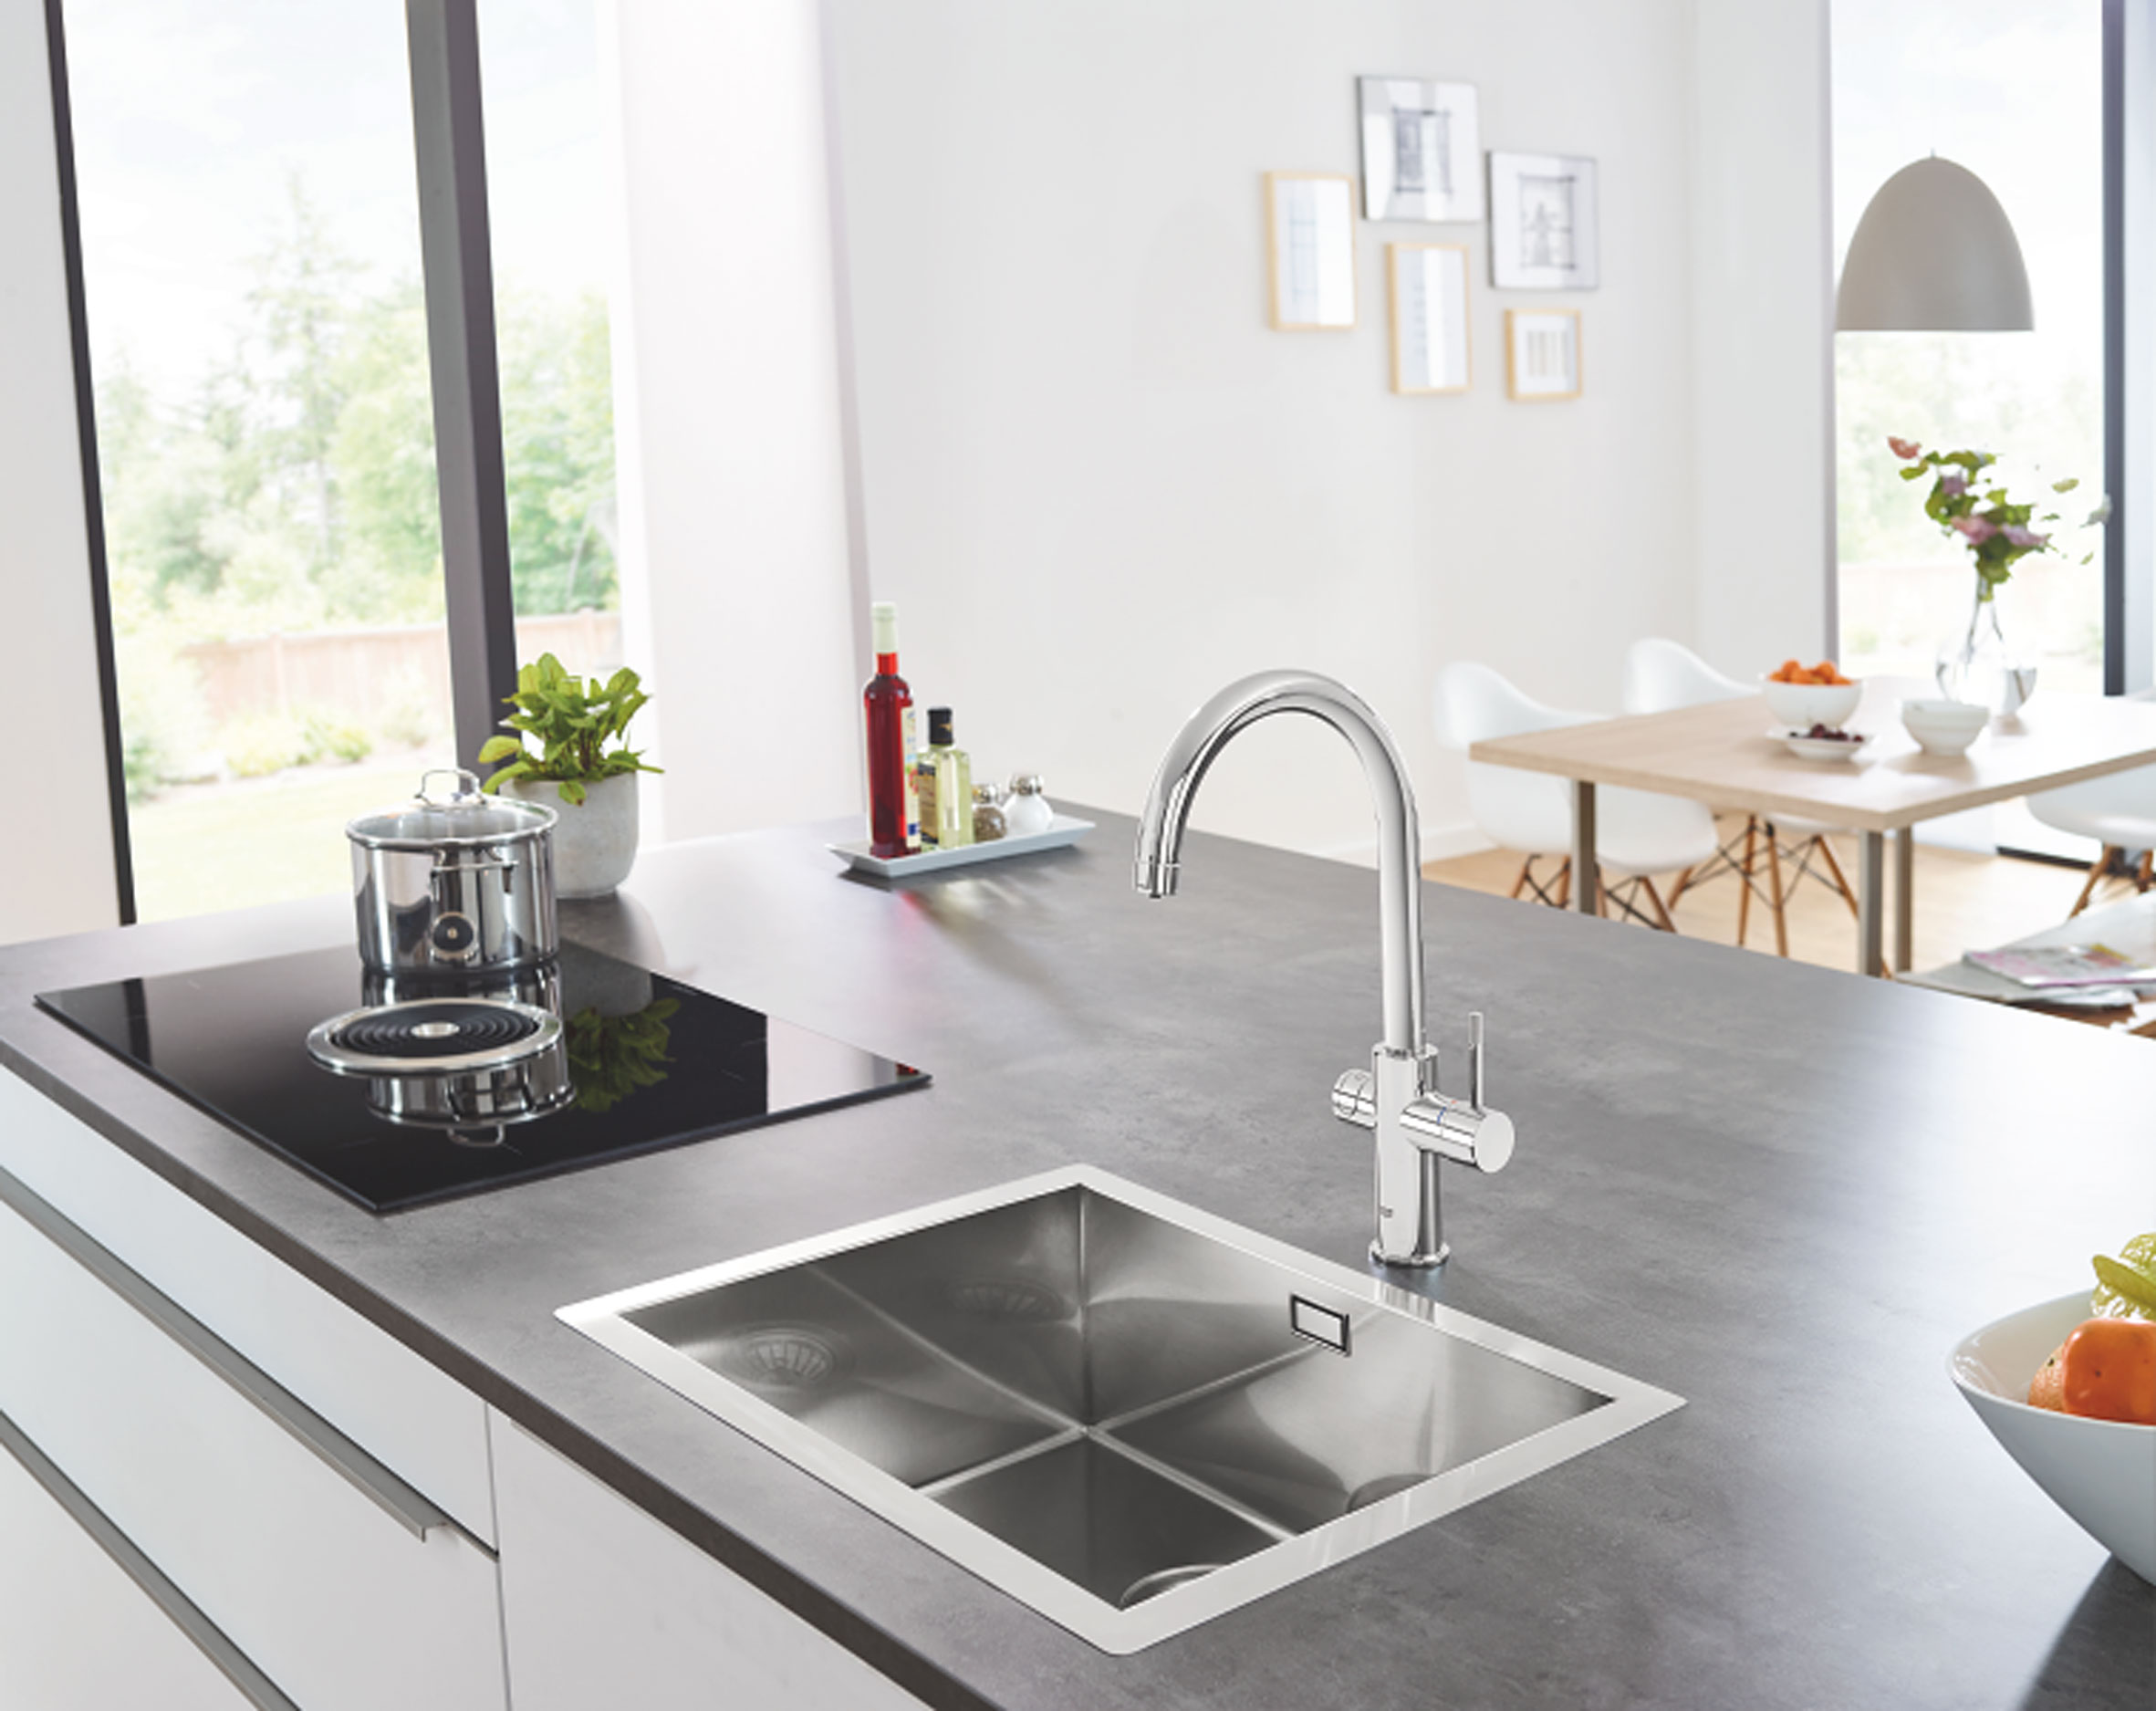 GROHE Red: Instant boiling hot water straight from the tap